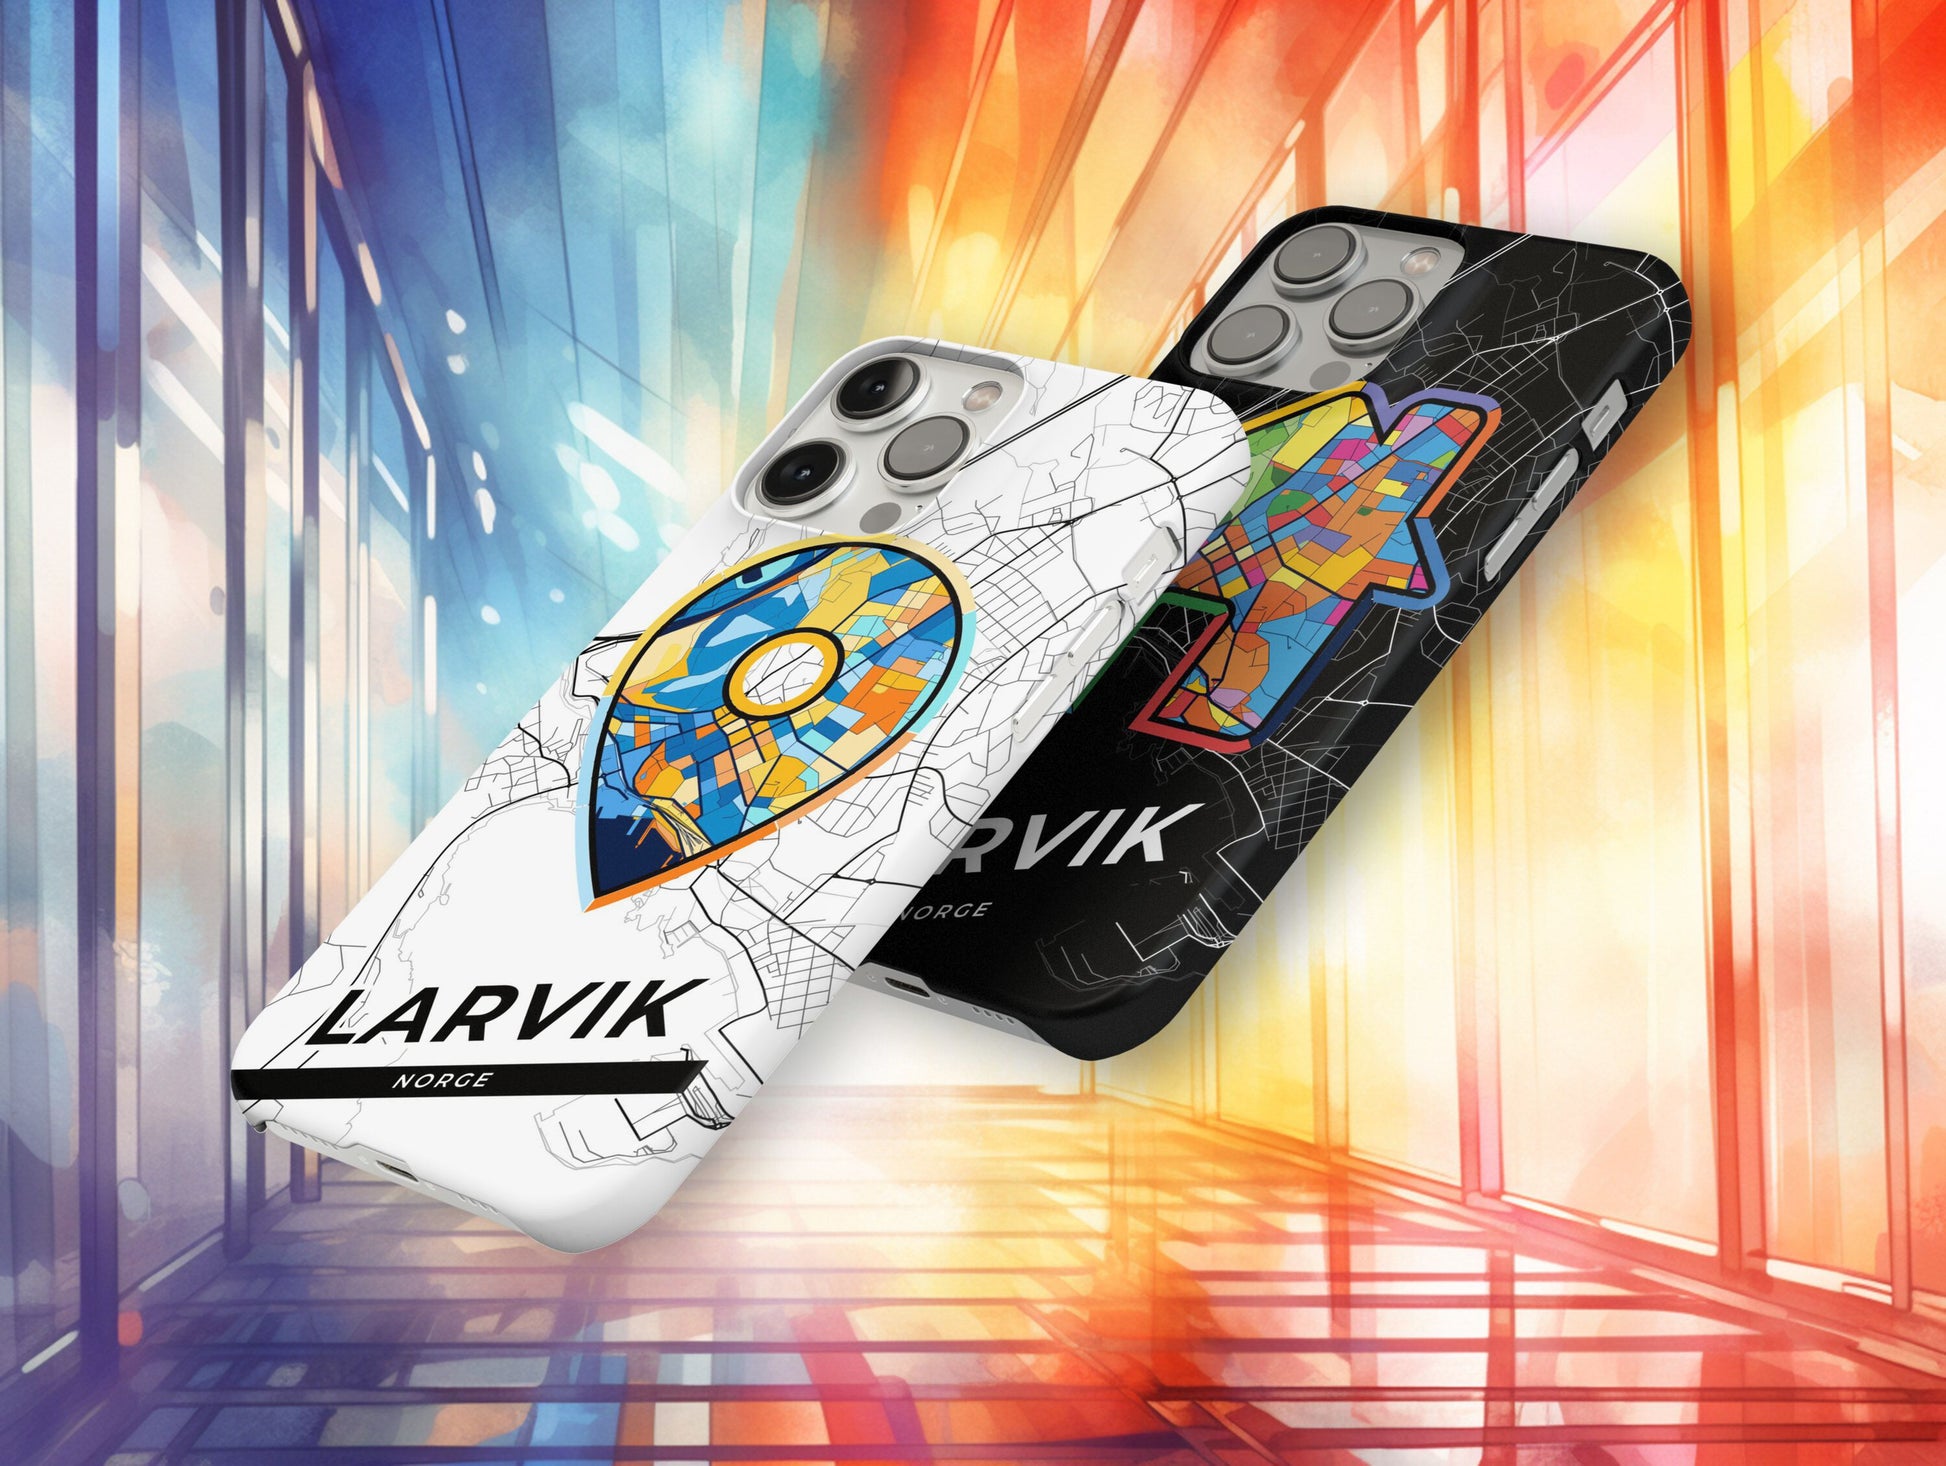 Larvik Norway slim phone case with colorful icon. Birthday, wedding or housewarming gift. Couple match cases.